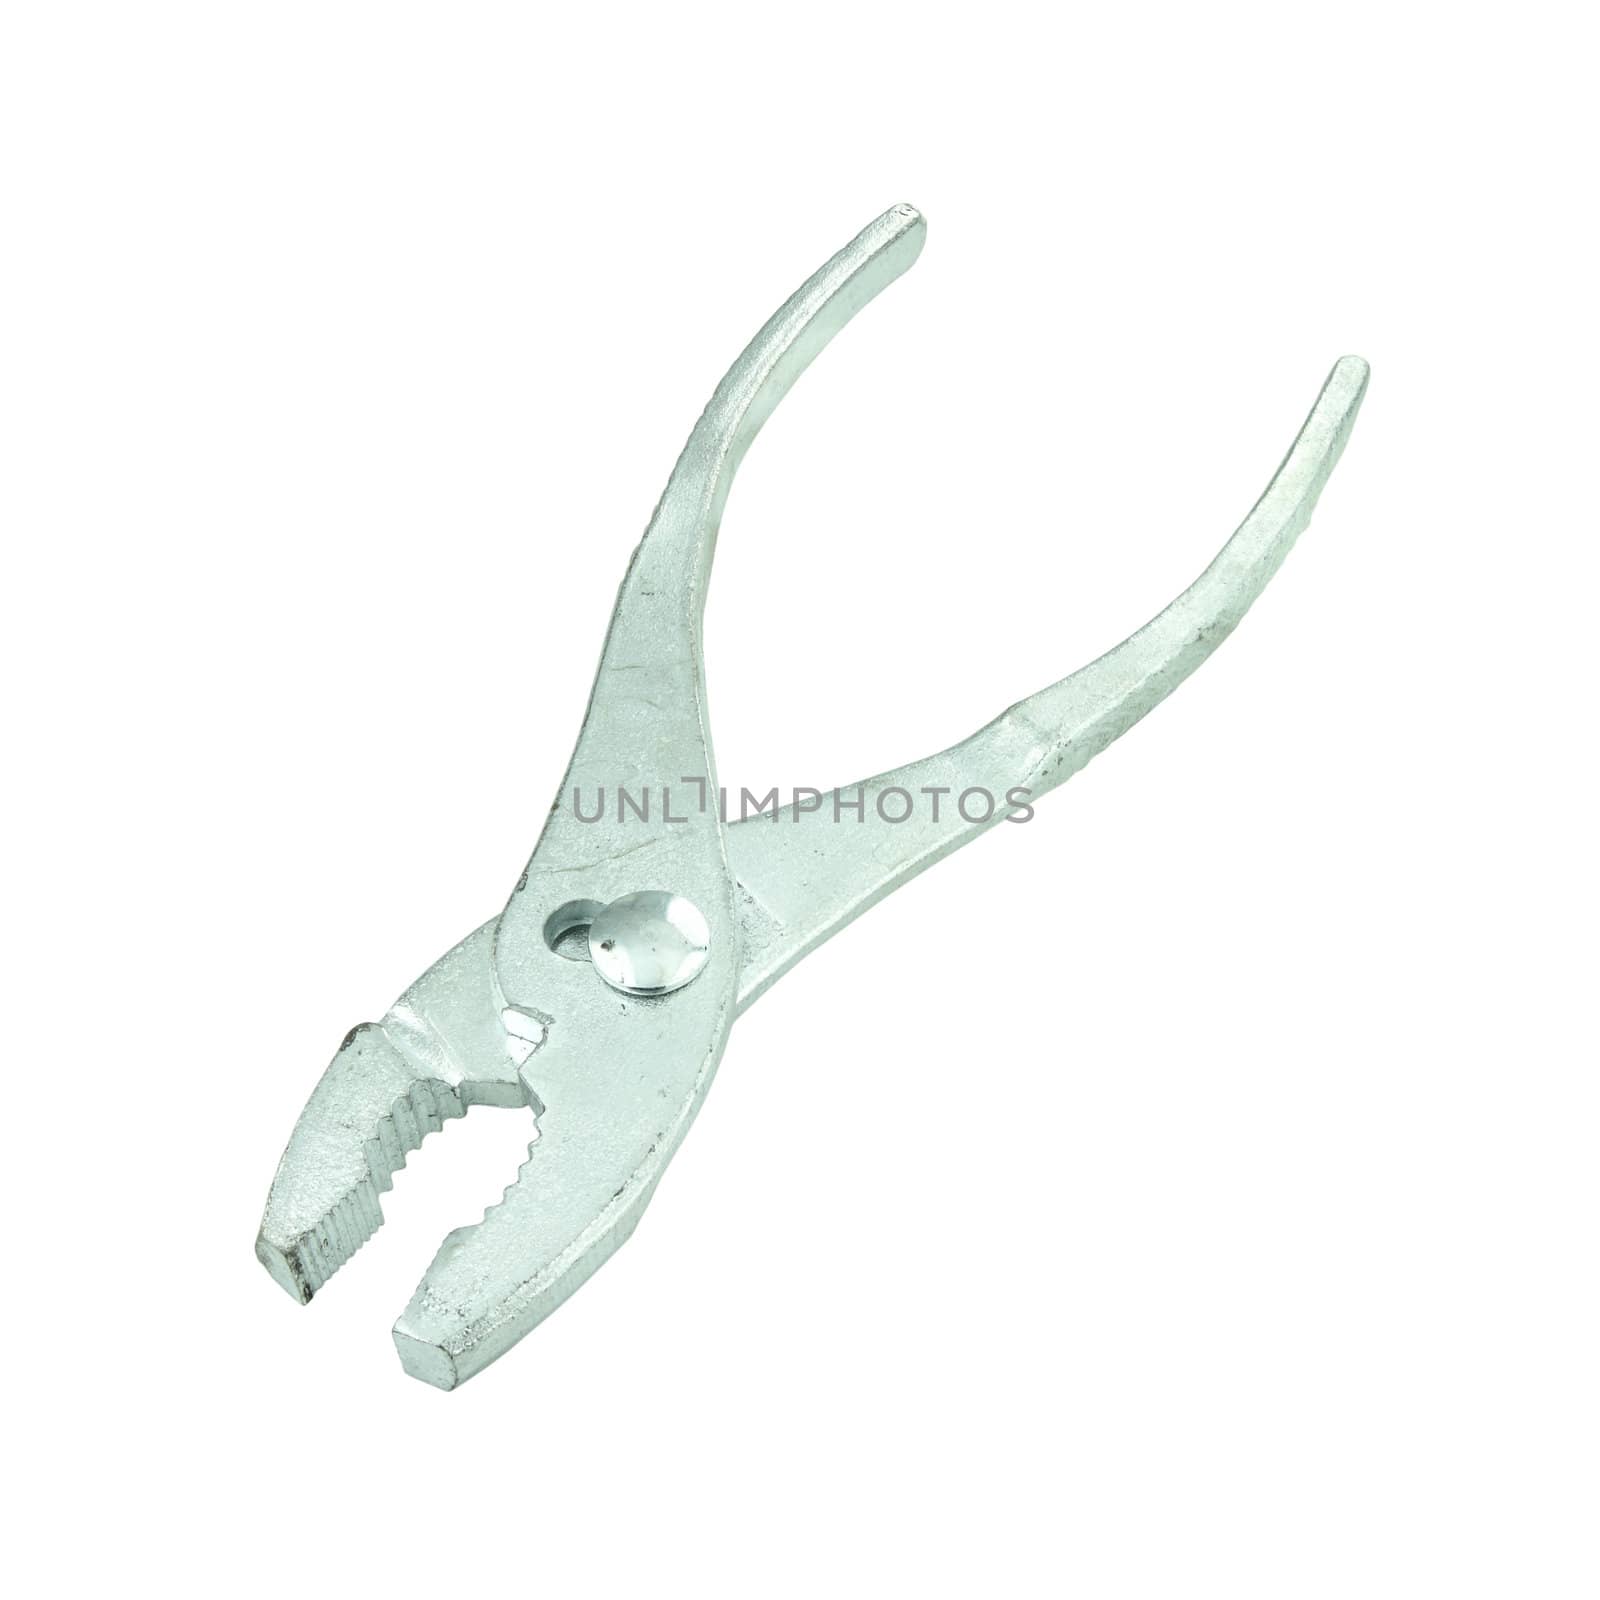 pliers isolated on a white background